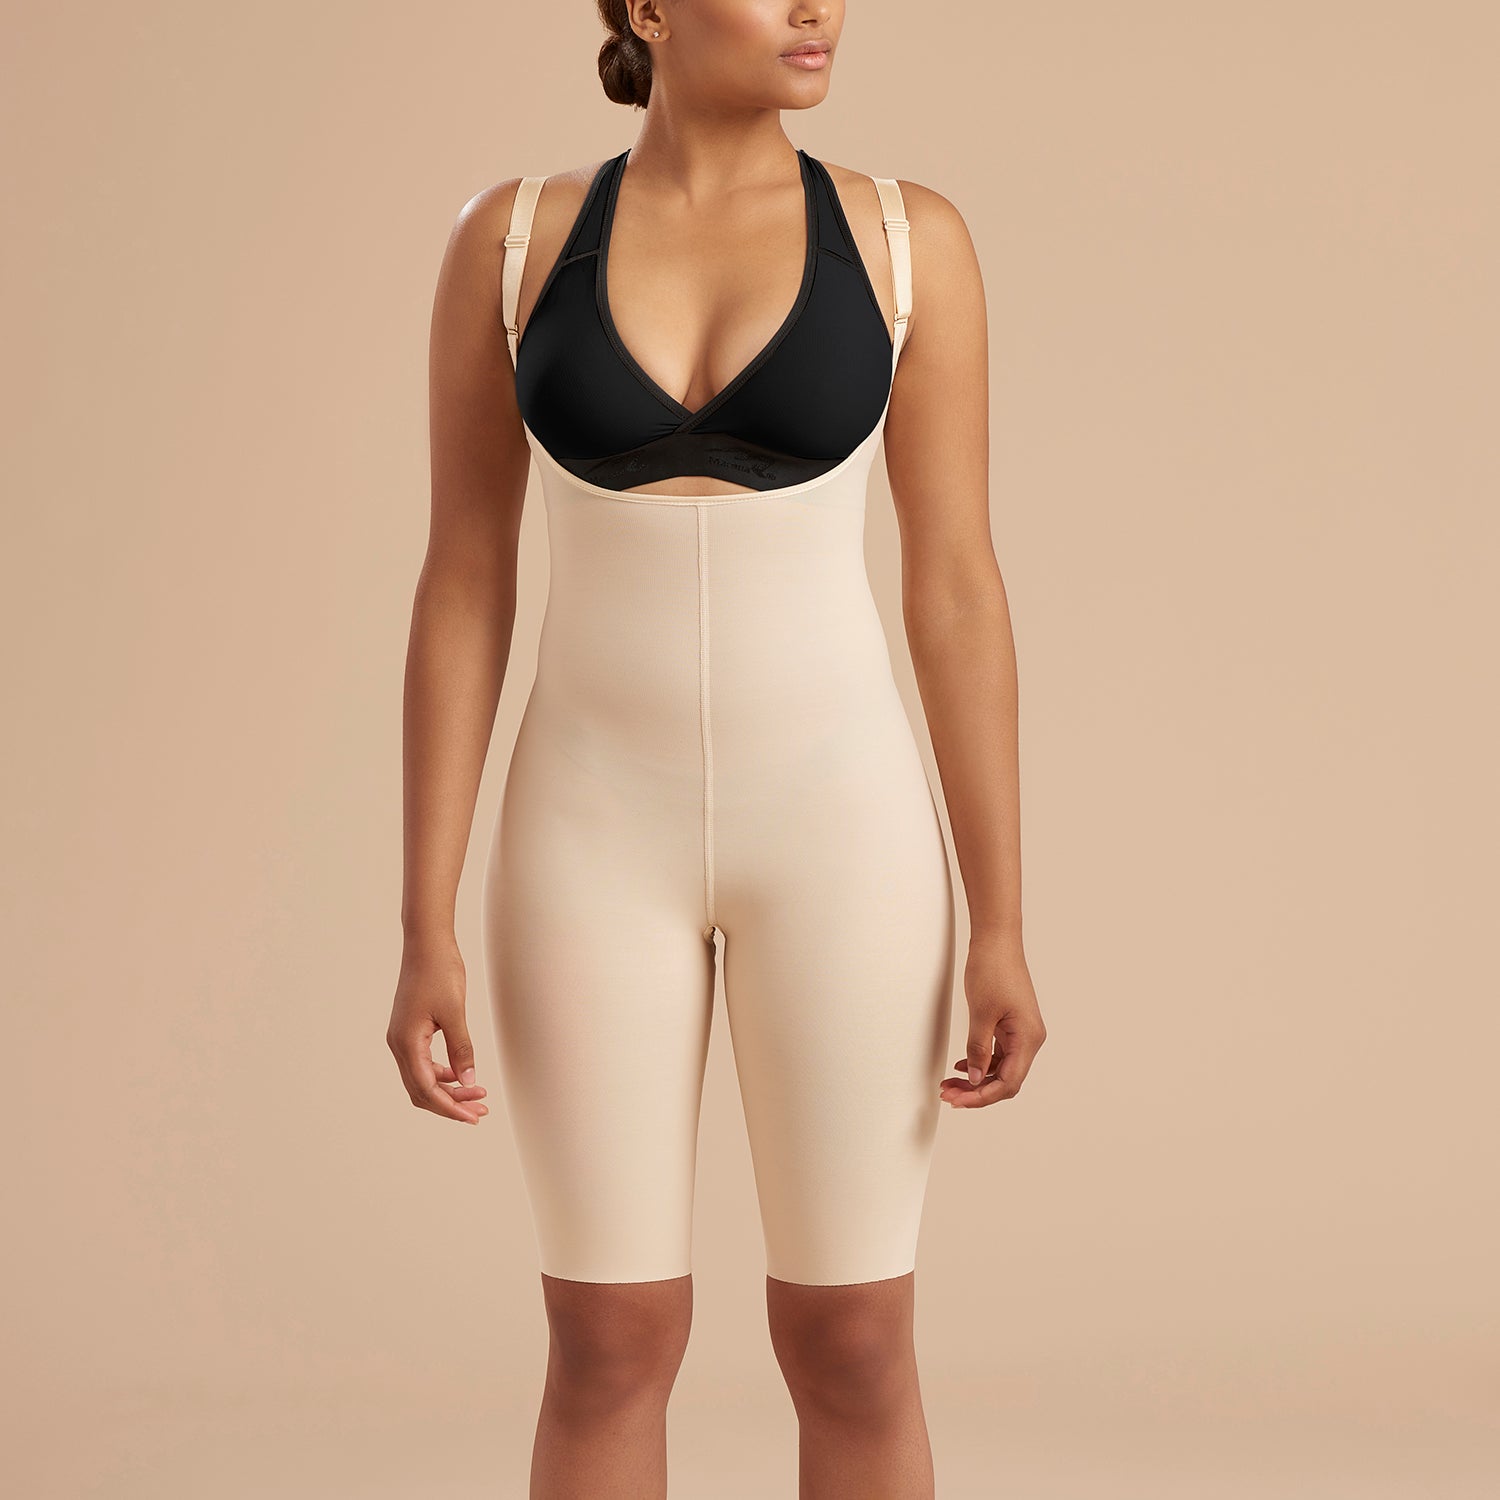 Marena Recovery style SFBHS2 Thigh length compression girdle with high back no closures, front view in beige